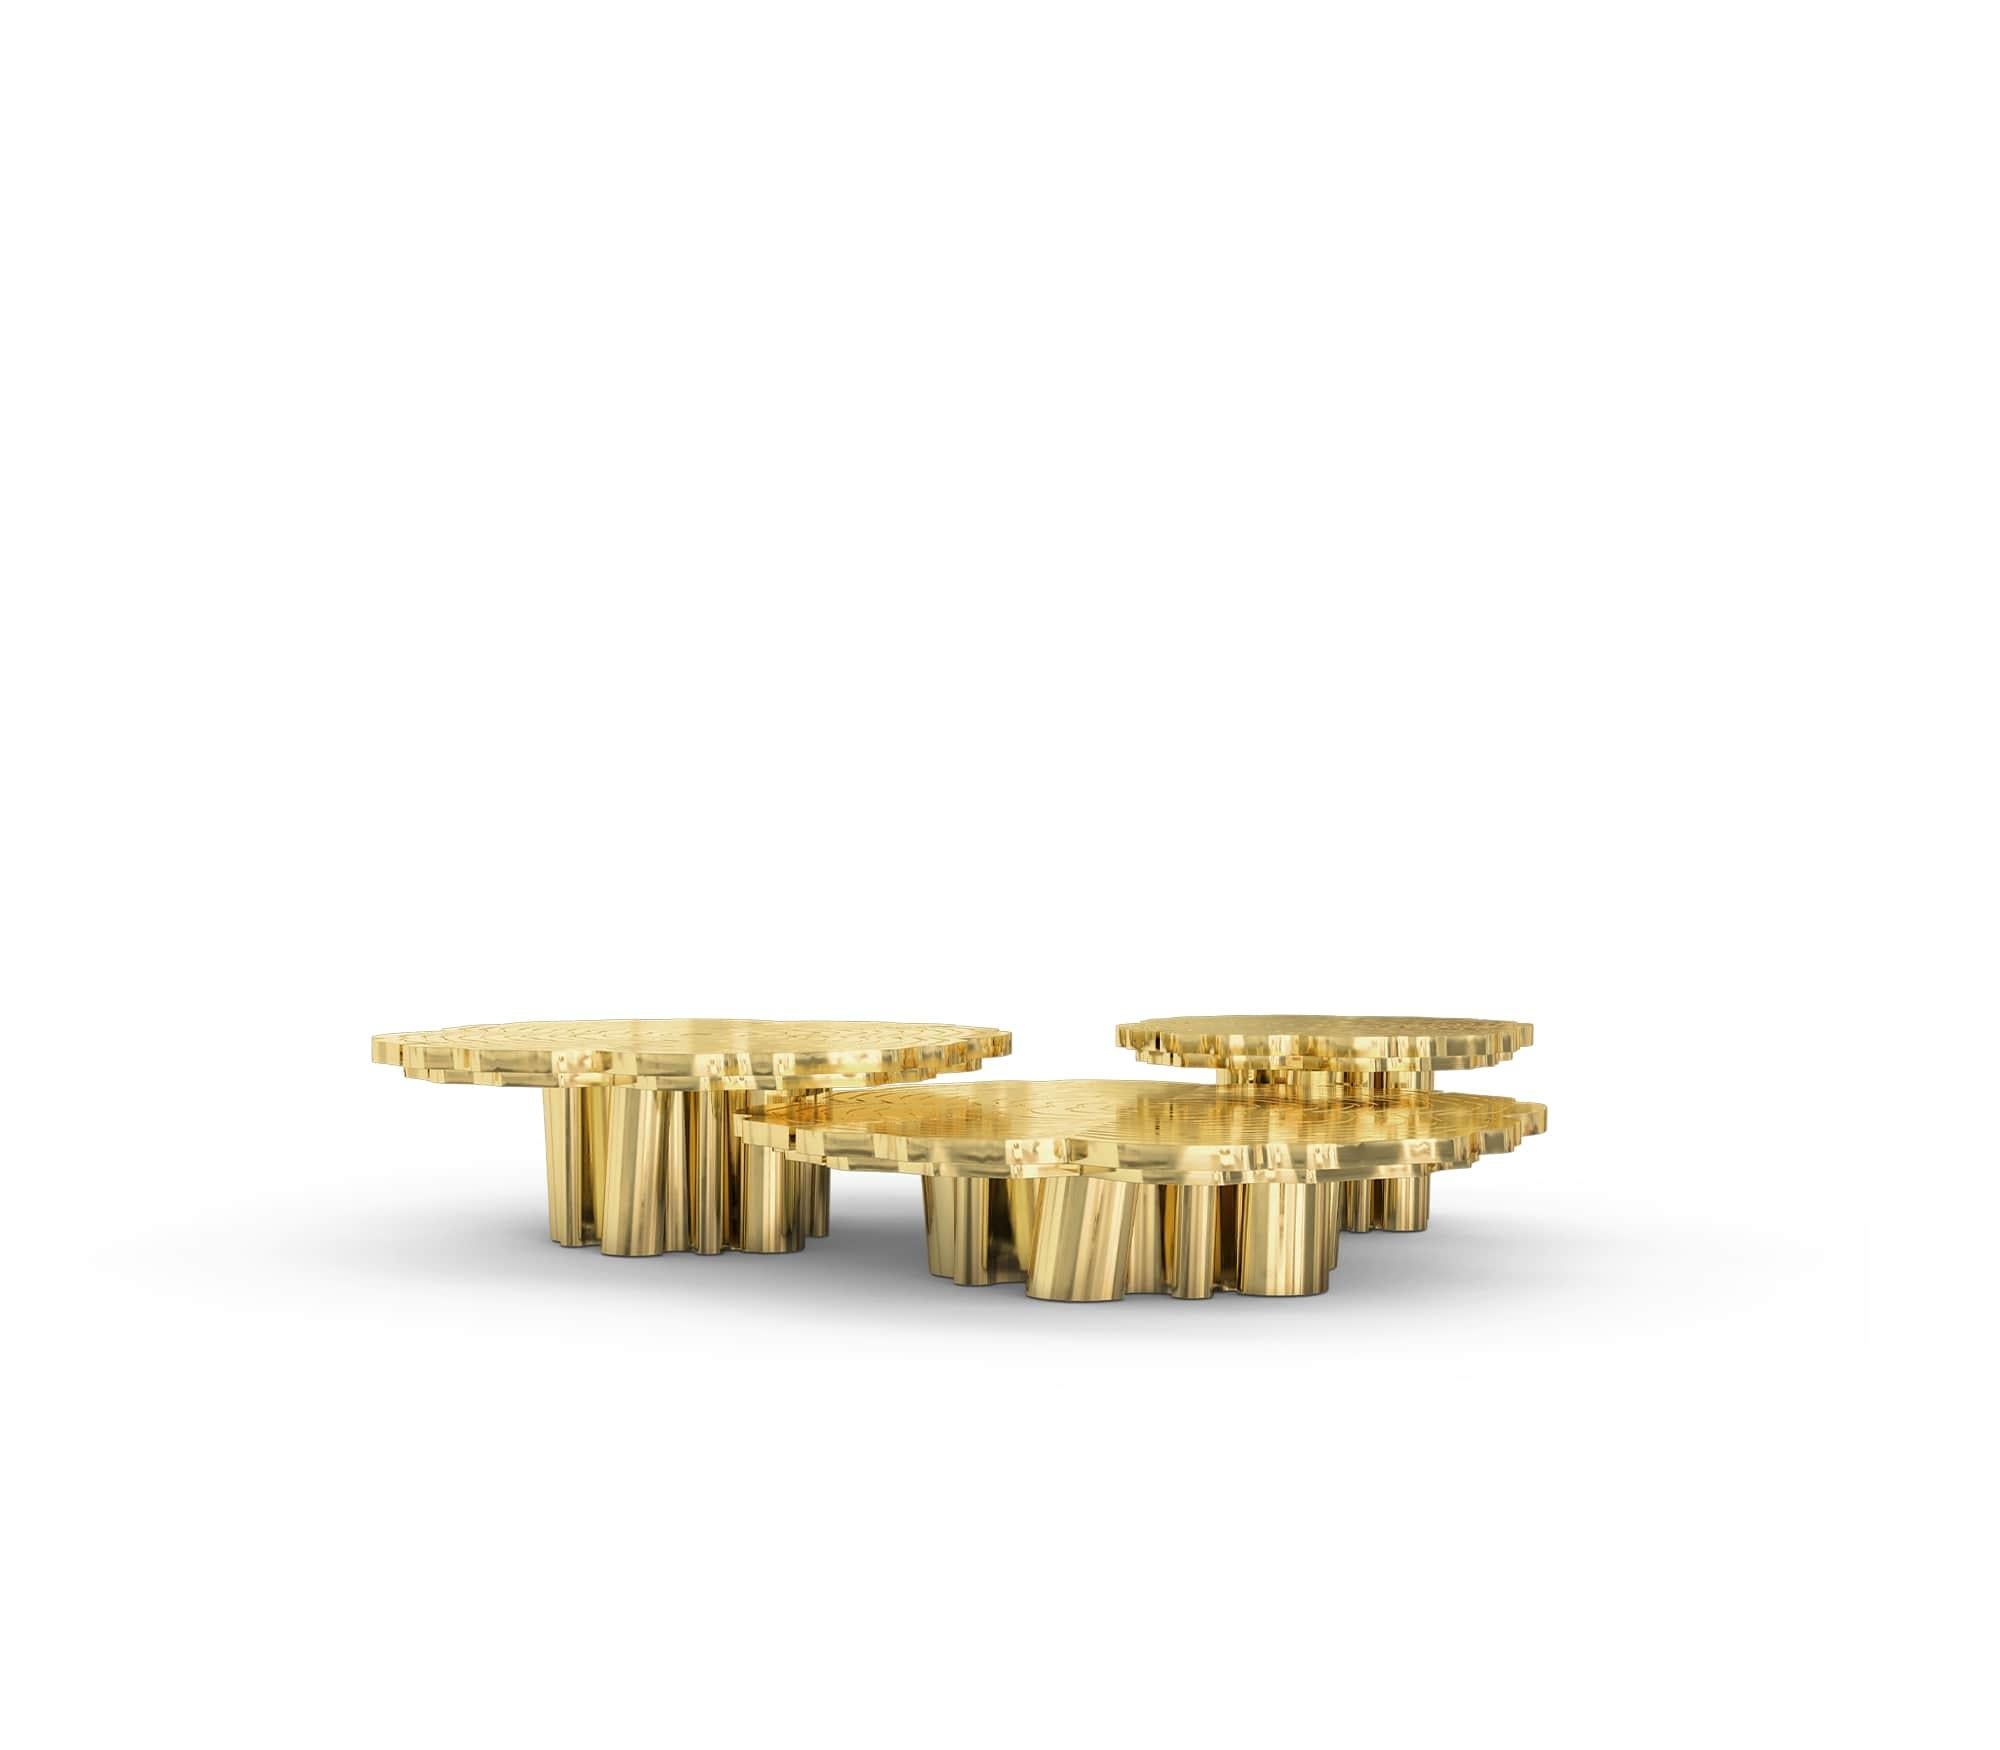 With one-of-a-kind design aesthetic and refined statement to the most influential minds, the Fortuna is a contemporary center table fit for any luxurious setting. Representing the essence of empowerment, sophistication, and mystics, the Fortuna